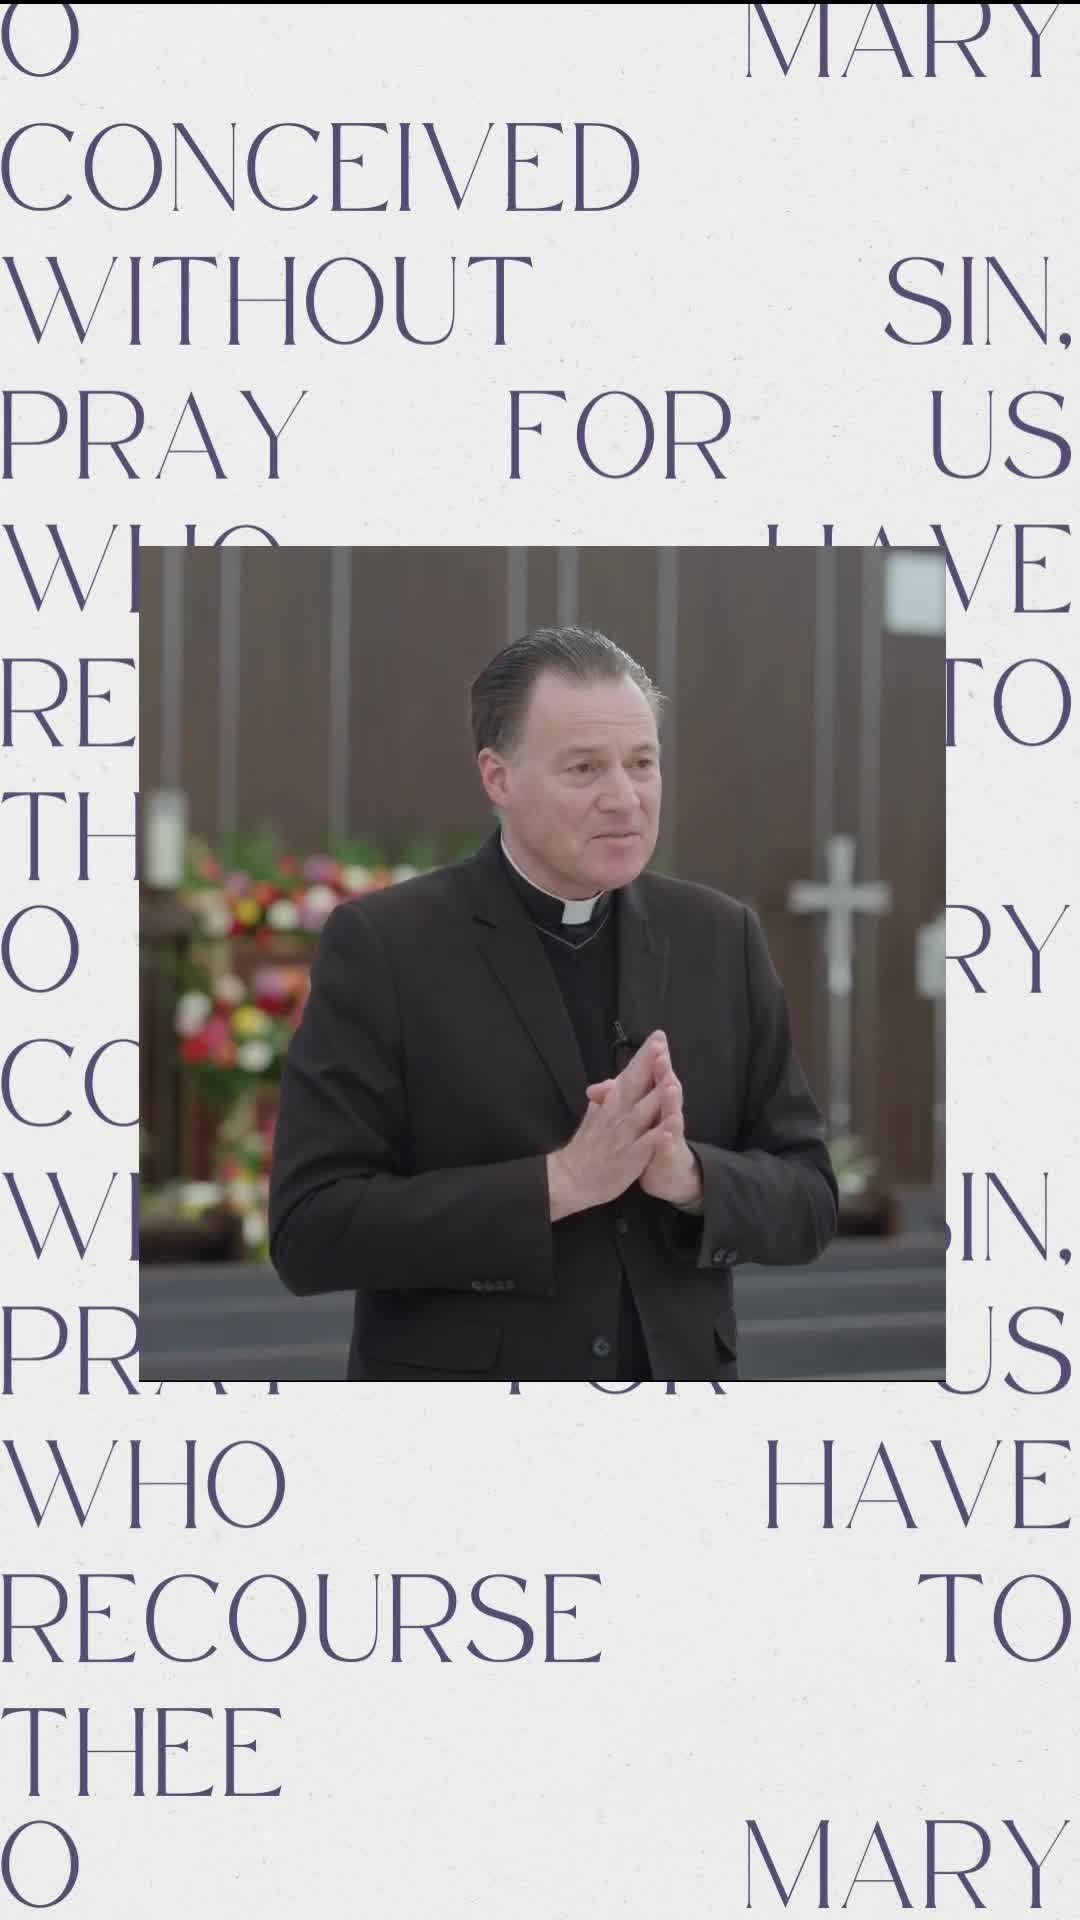 What is the Feast of the #ImmaculateConception all about? ⁠
⁠
Msgr. Stephen shares what today's celebration is about - God’s grace and the meaning of true freedom. ⁠
⁠
Listen to the full reflection and learn more through the link in our bio.